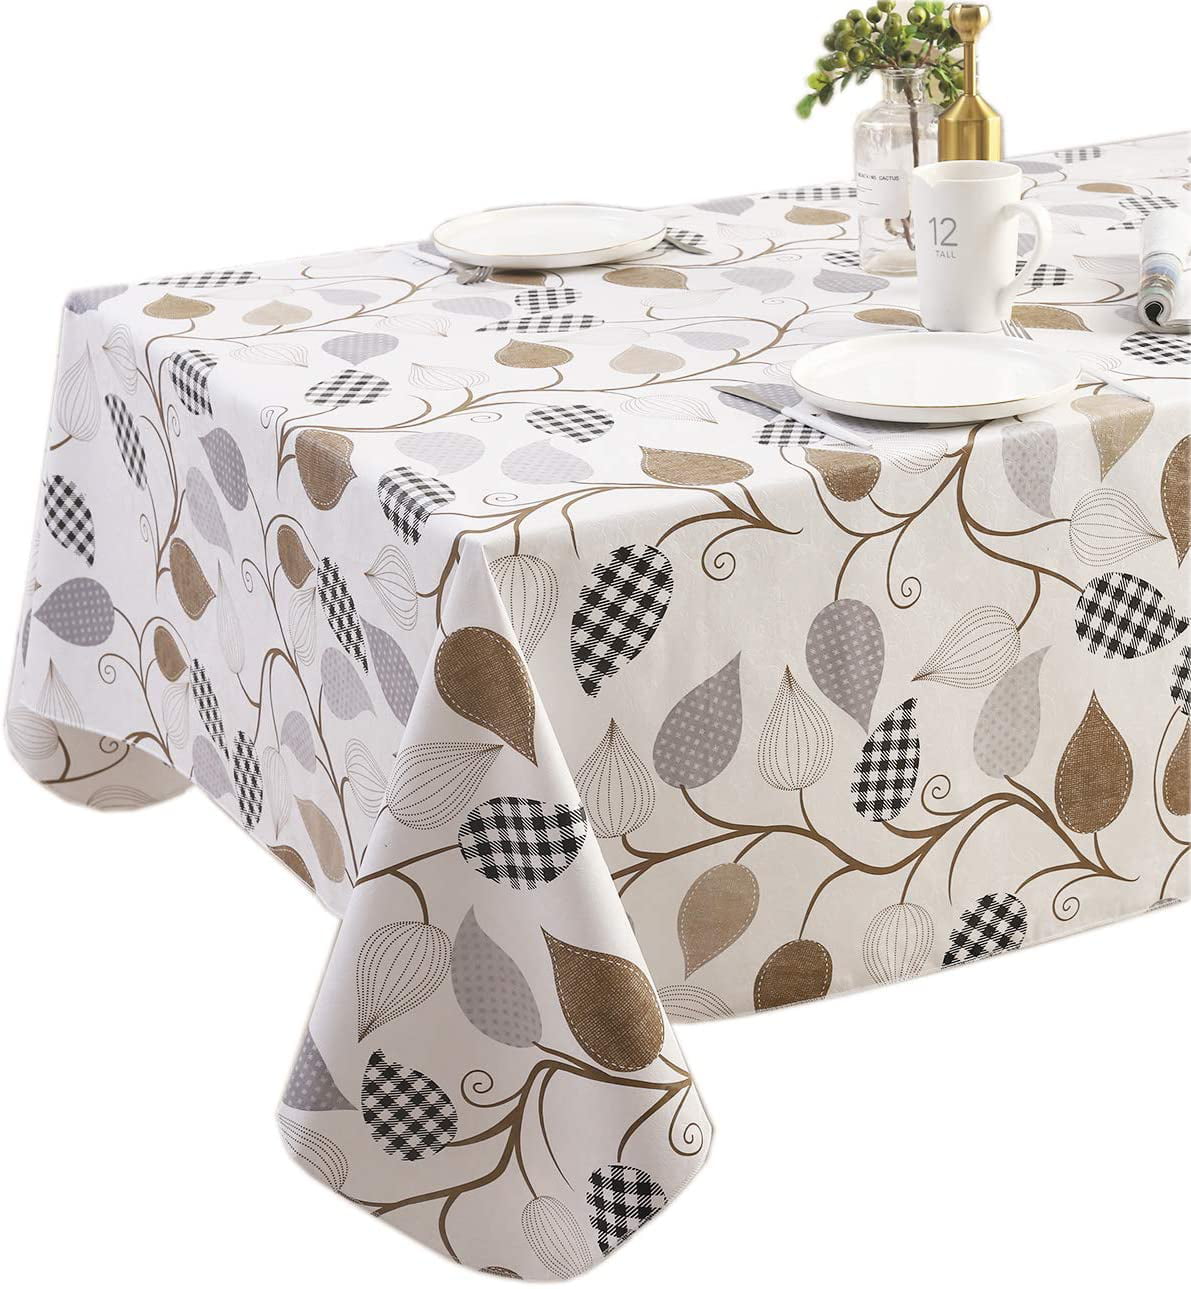 Ice Cream Fruits 300 x 140cm TheFabricTrade Wipe Clean PVC Tablecloth Vinyl Oilcloth Kitchen Table Cover Protector